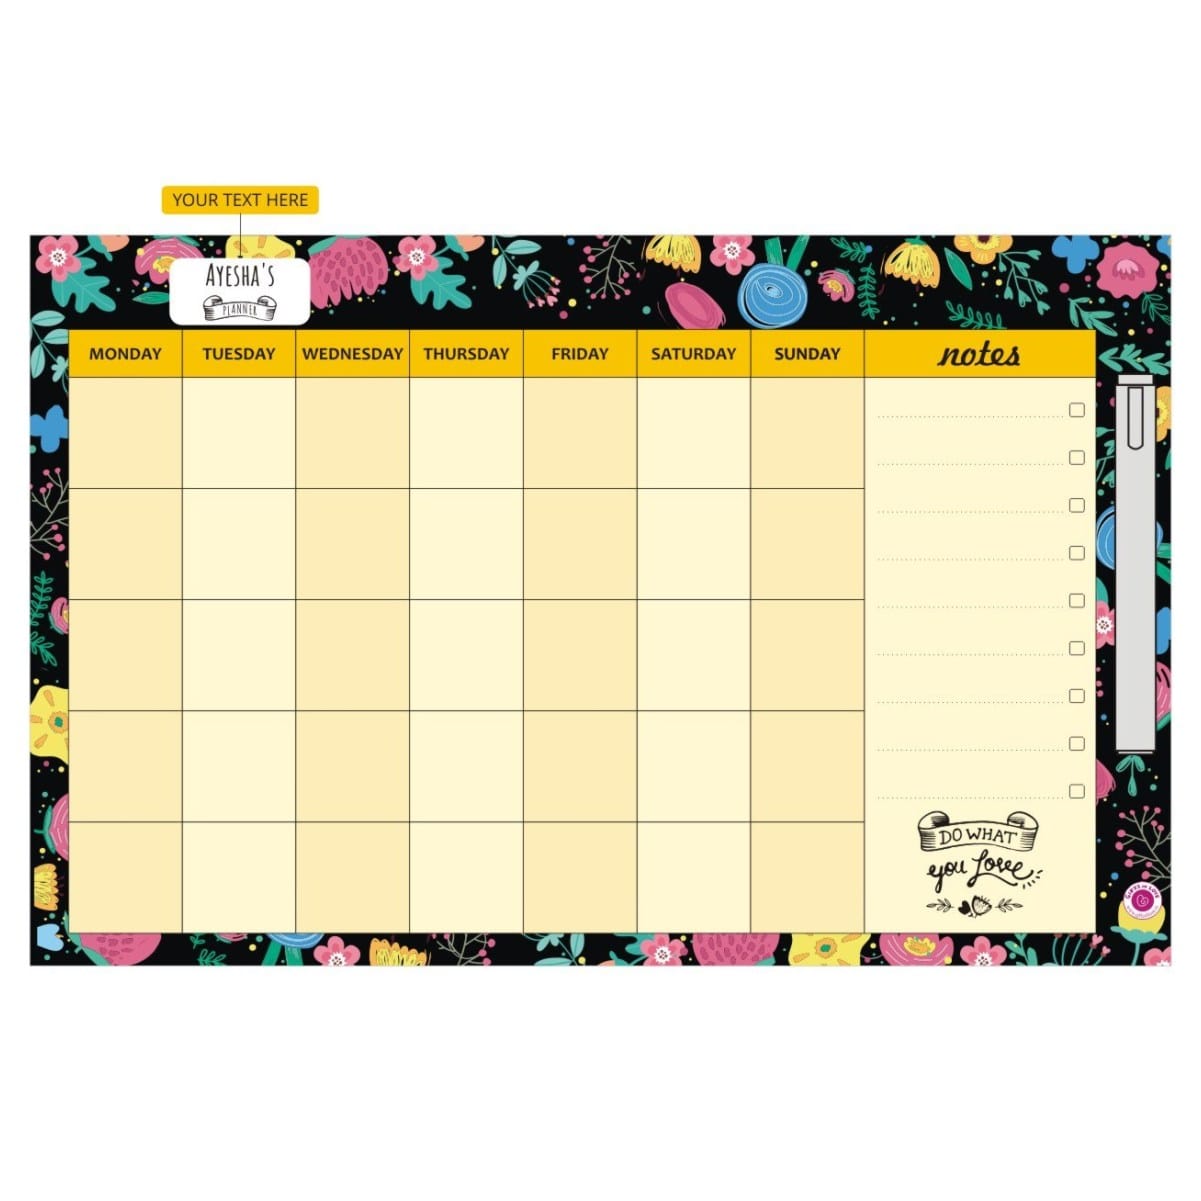 Gifts of Love Dry Erase Board Big - Do What You Love Month Planner